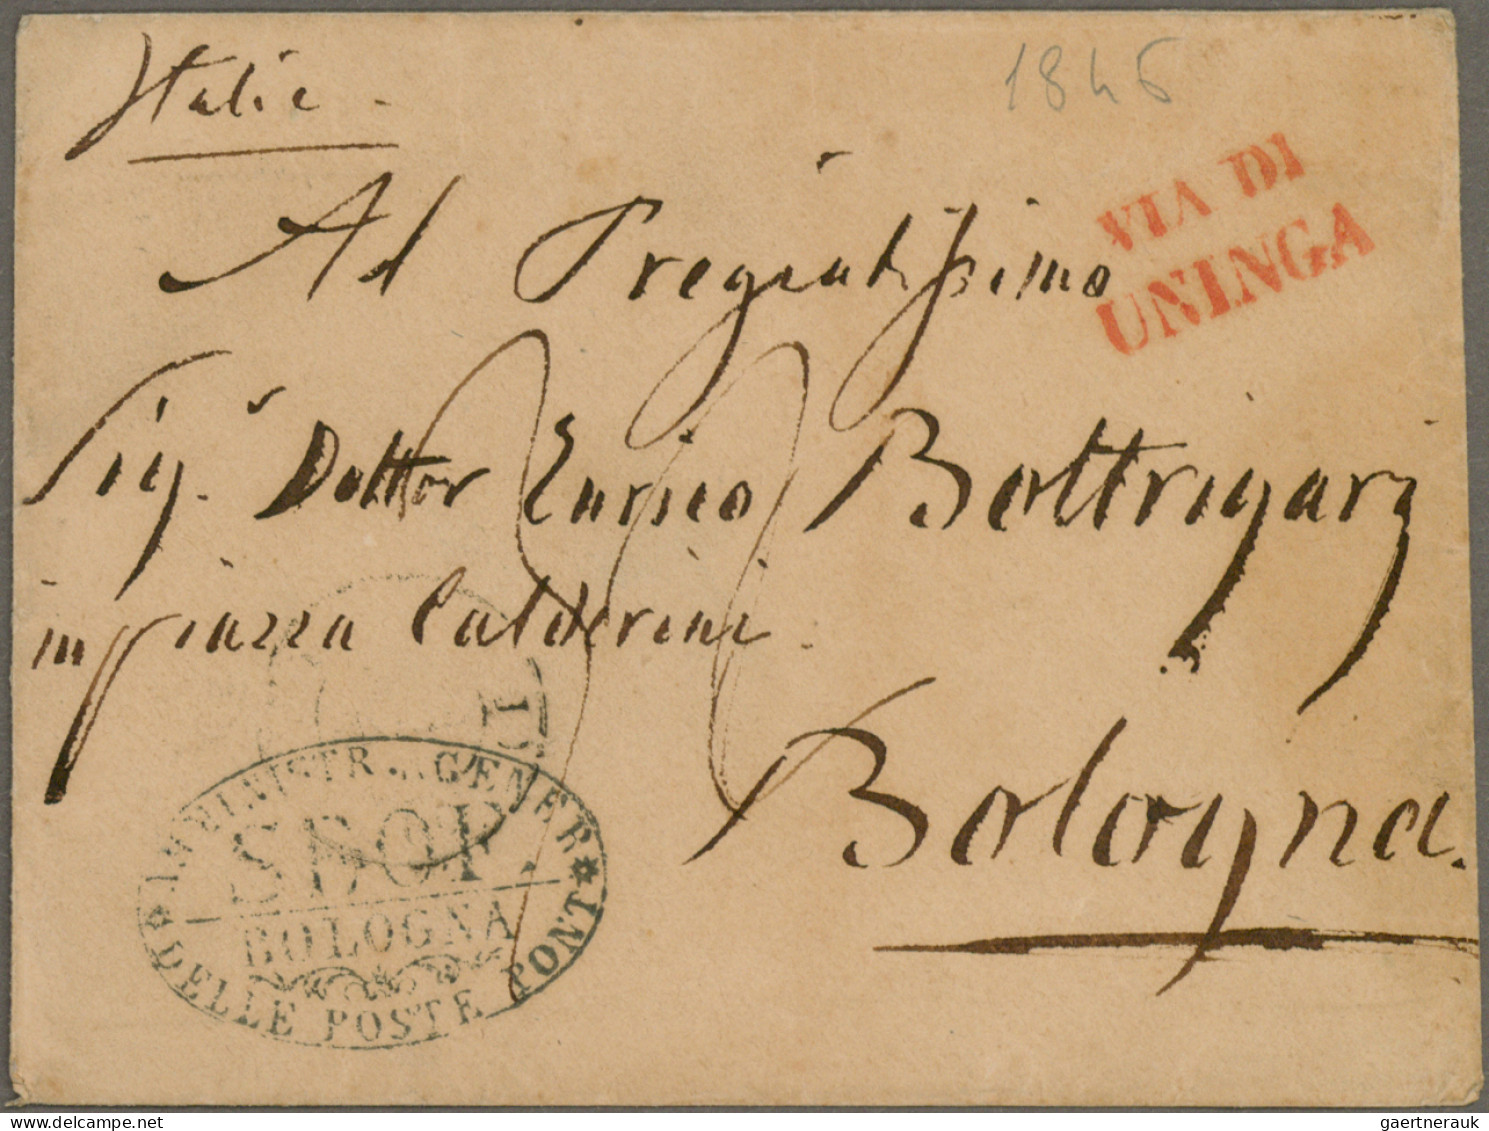 Italy -  Pre Adhesives  / Stampless Covers: 1840/1860, Over 30 Stampless Letters - ...-1850 Préphilatélie